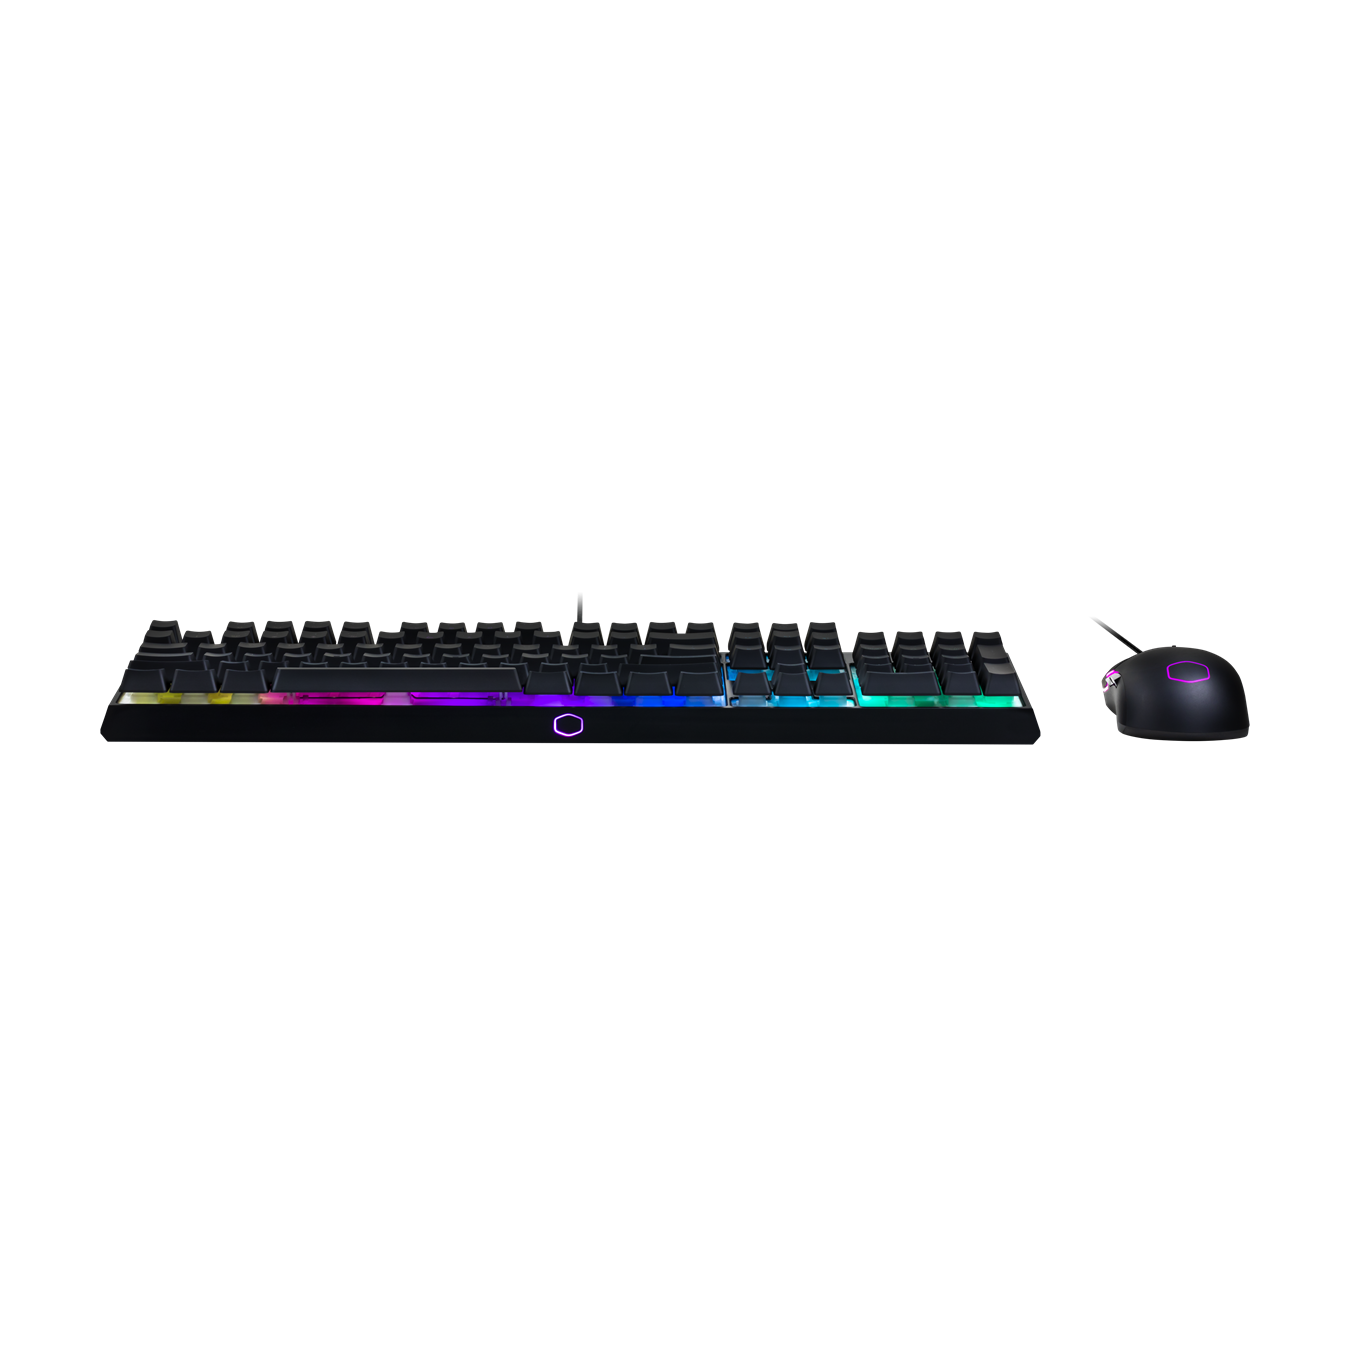 MS110 RGB Mechanical Gaming Keyboard - Right-handed optimization with new coating for increased comfort and durability